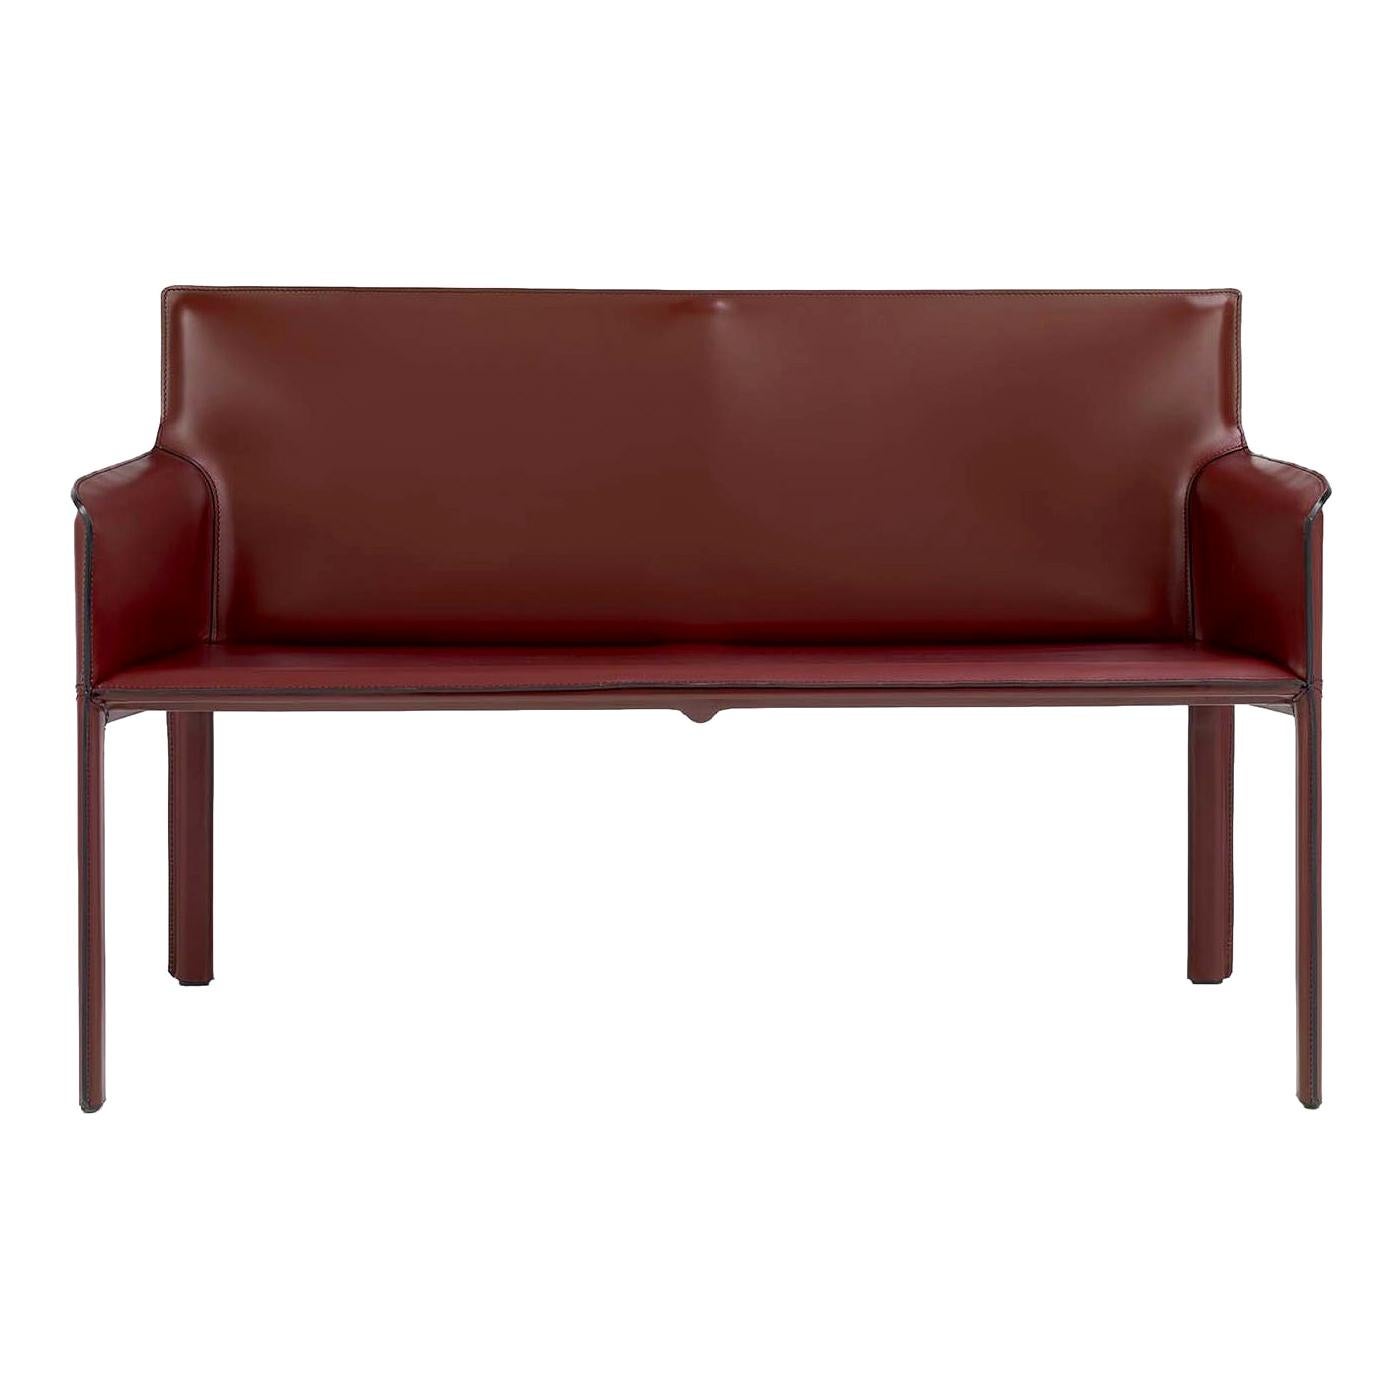 Pasqualina Relax Sofa by Grassi&Bianchi For Sale